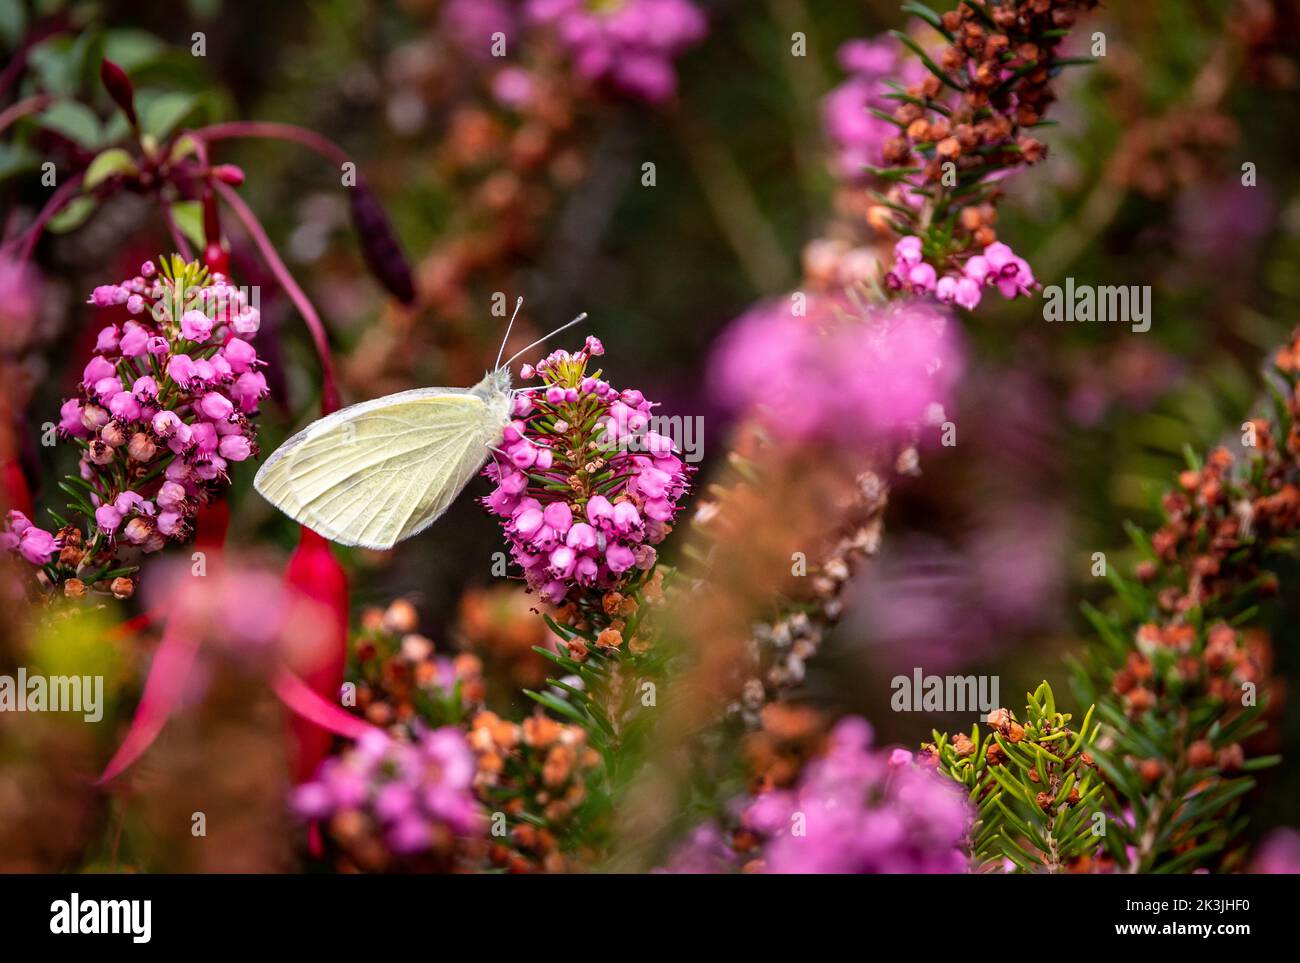 Cabbage White butterfly in English garden on purple heather foliage Stock Photo